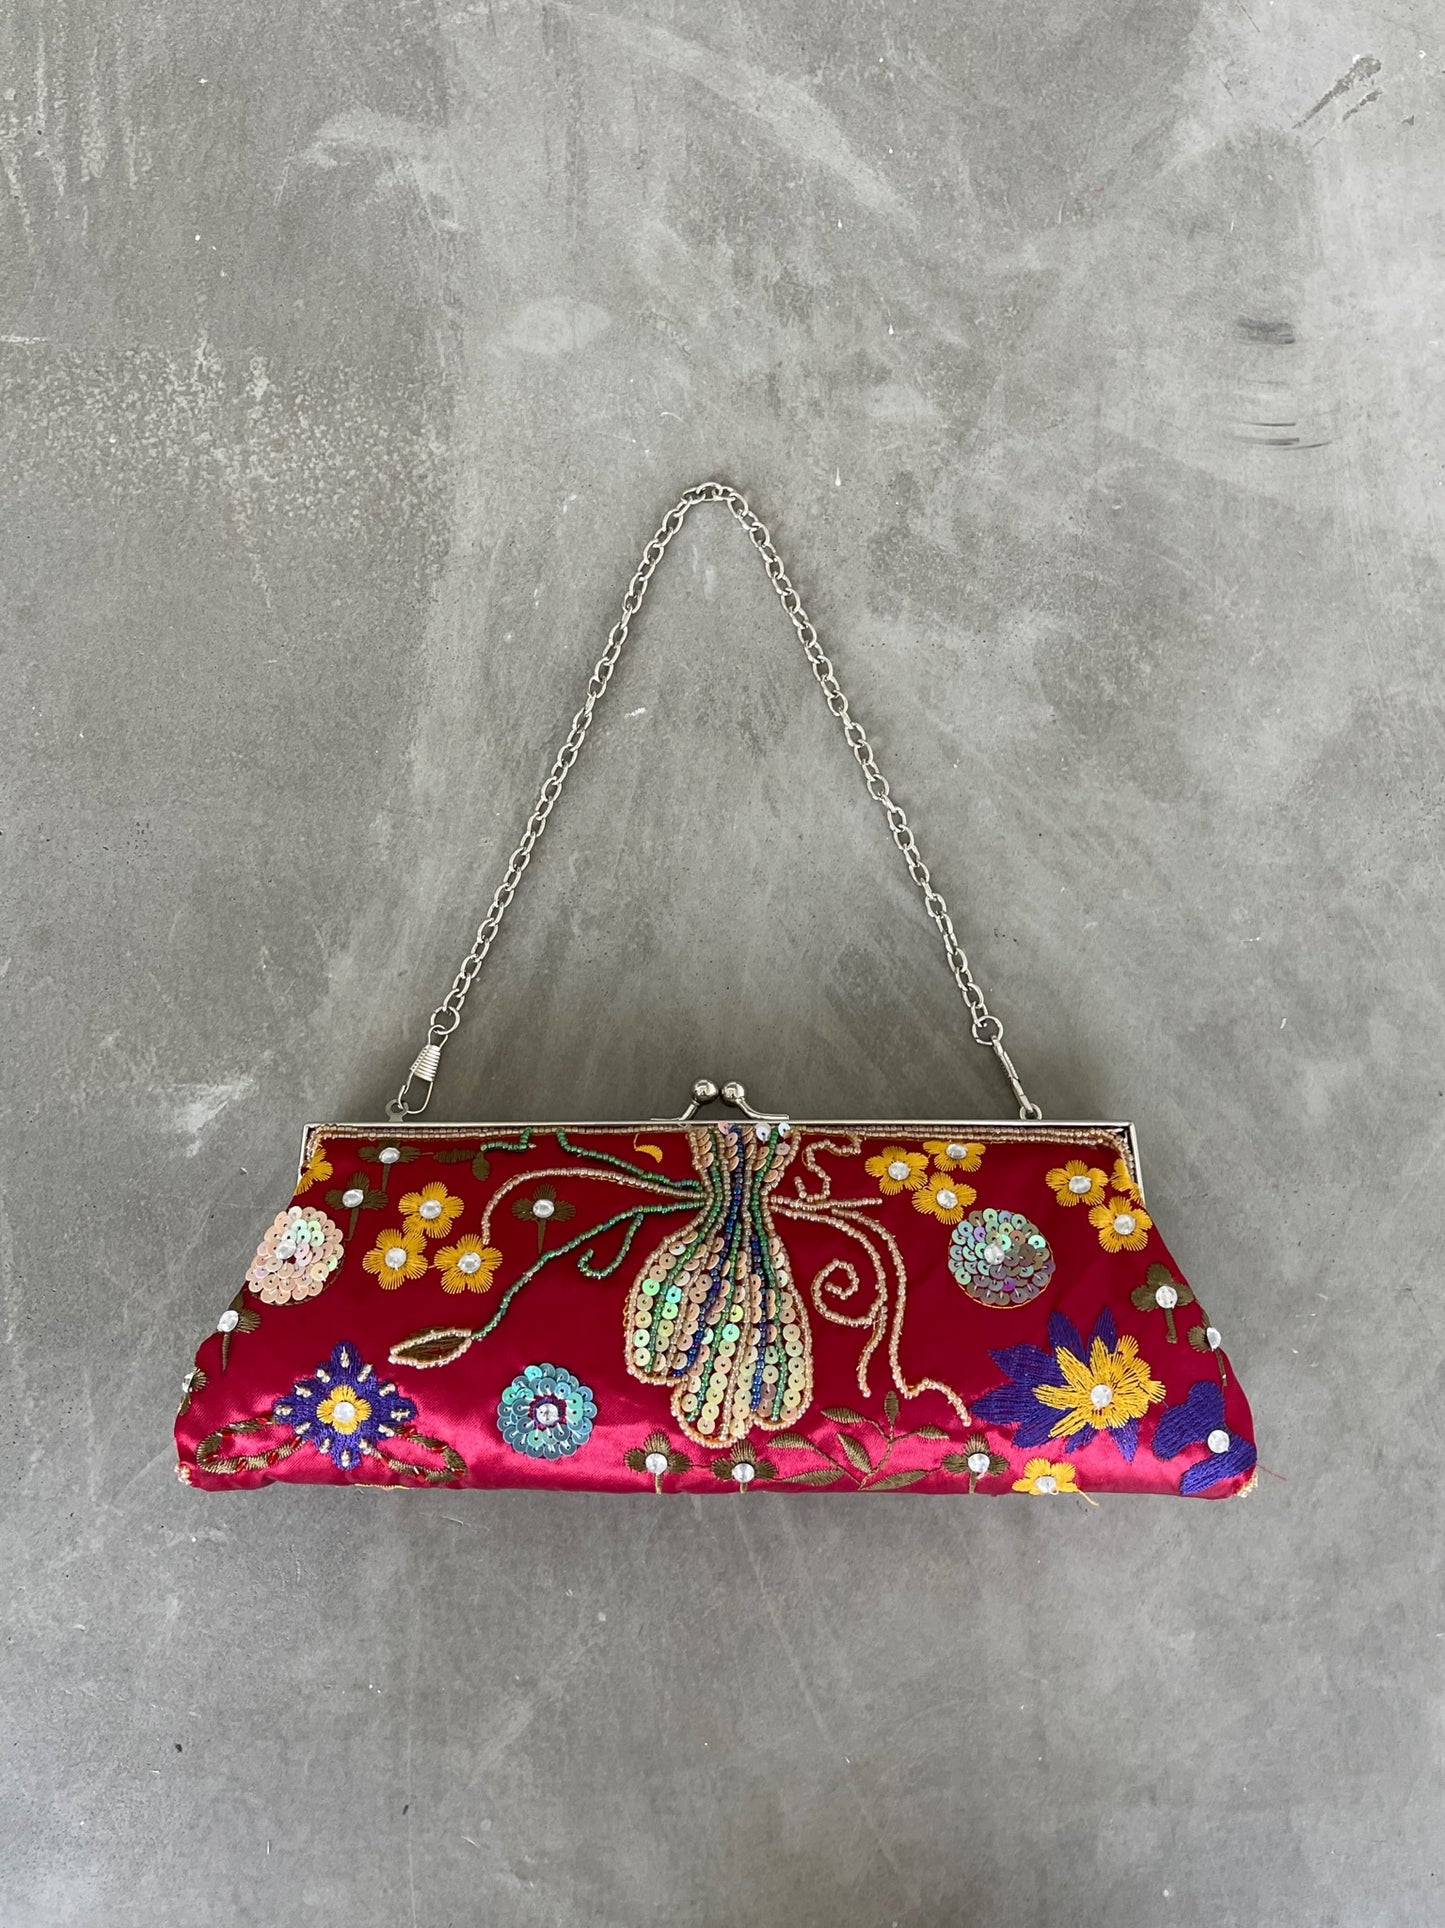 Butterfly Garden Embroidered Purse - Red